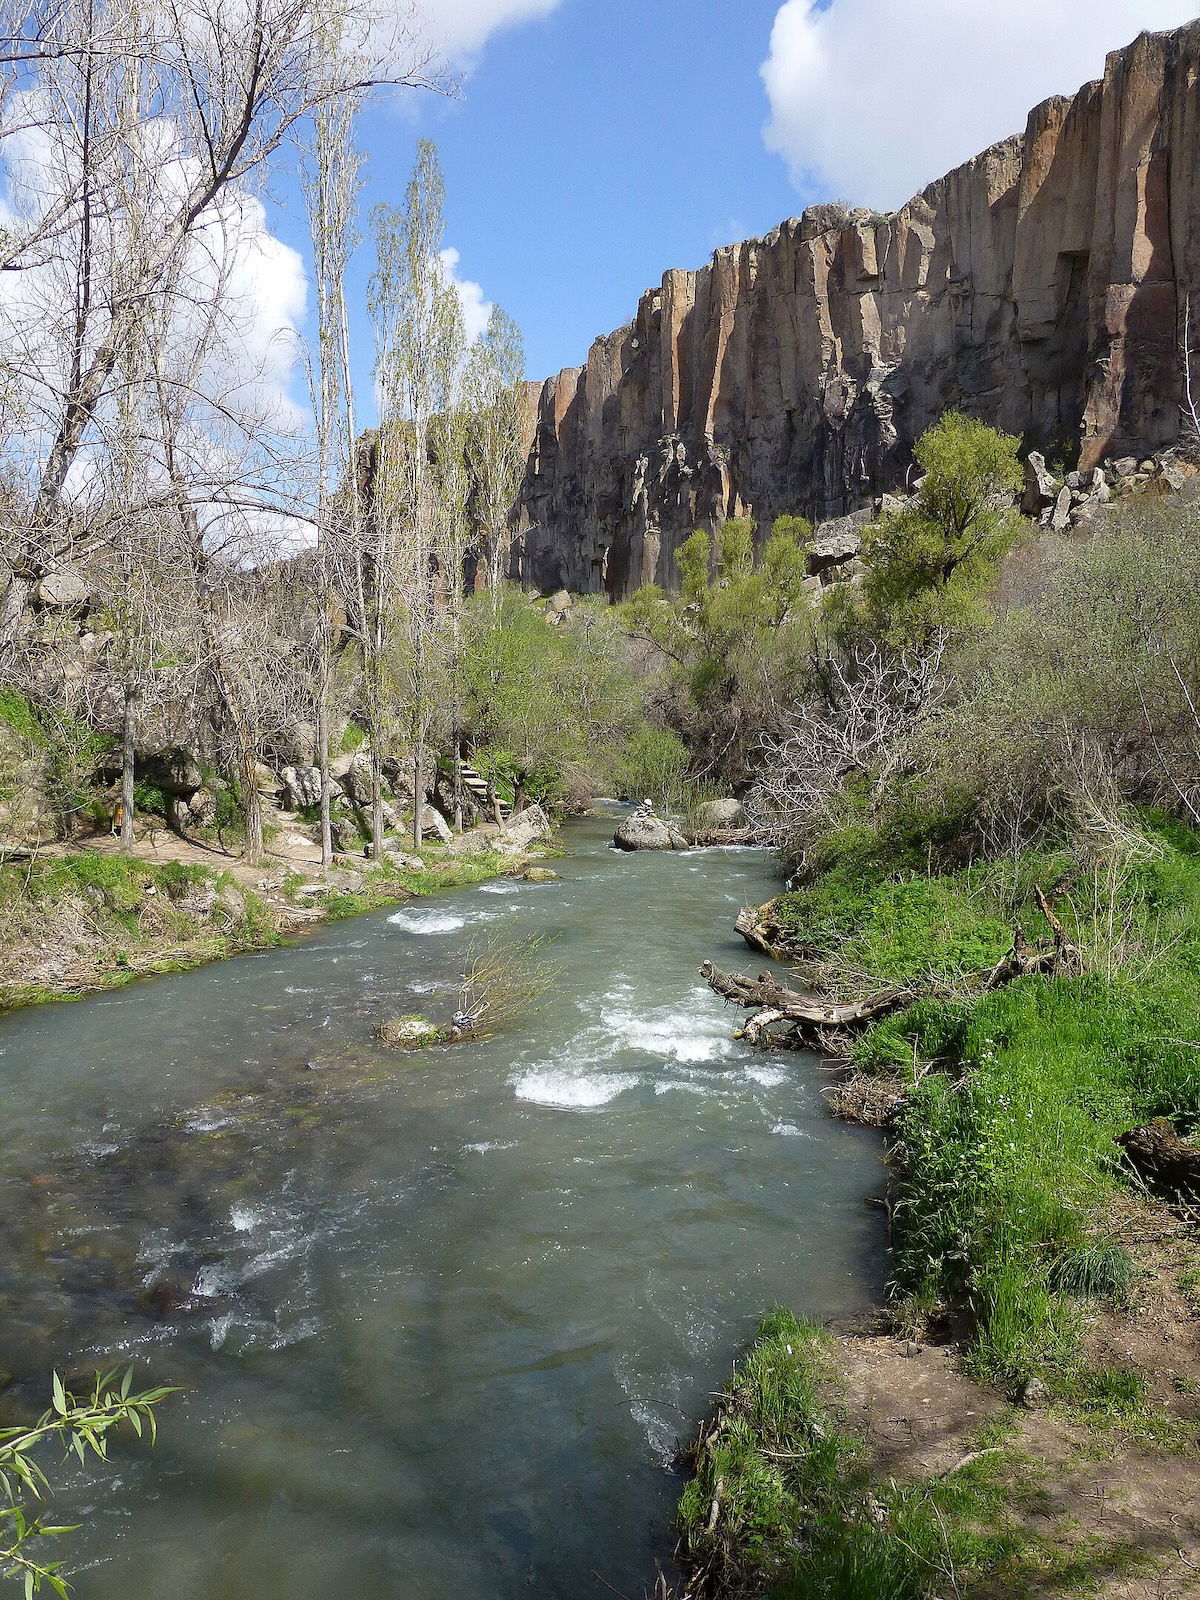 Melendiz river flowing through a lush valley with tall, rugged cliffs on one side under a clear blue sky in Cappadocia